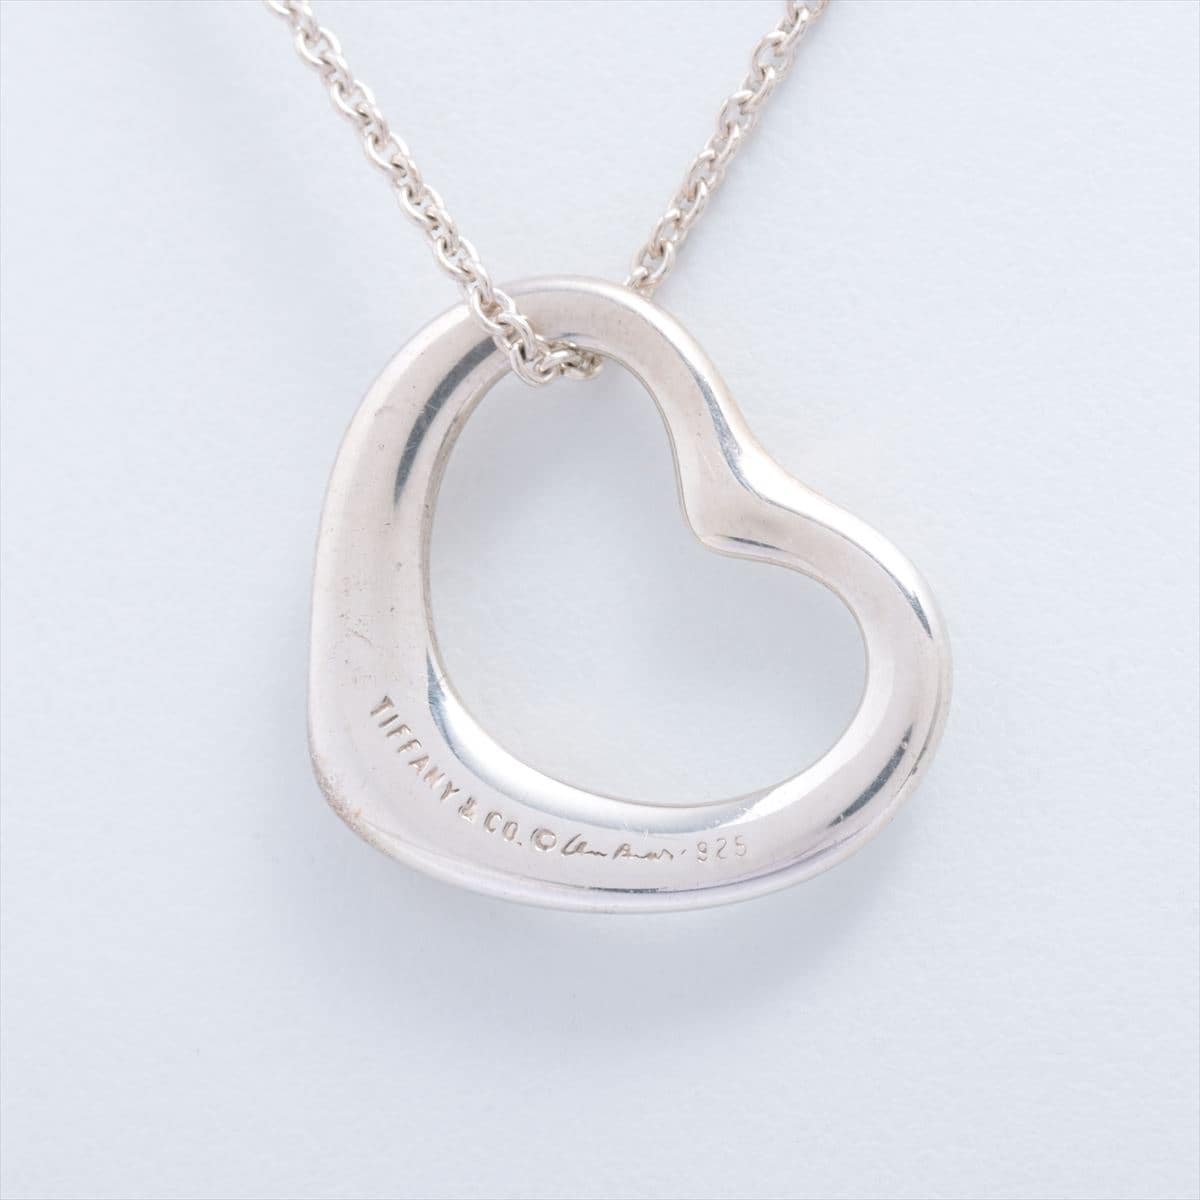 Tiffany Open Heart Necklace 925 5.9g Silver